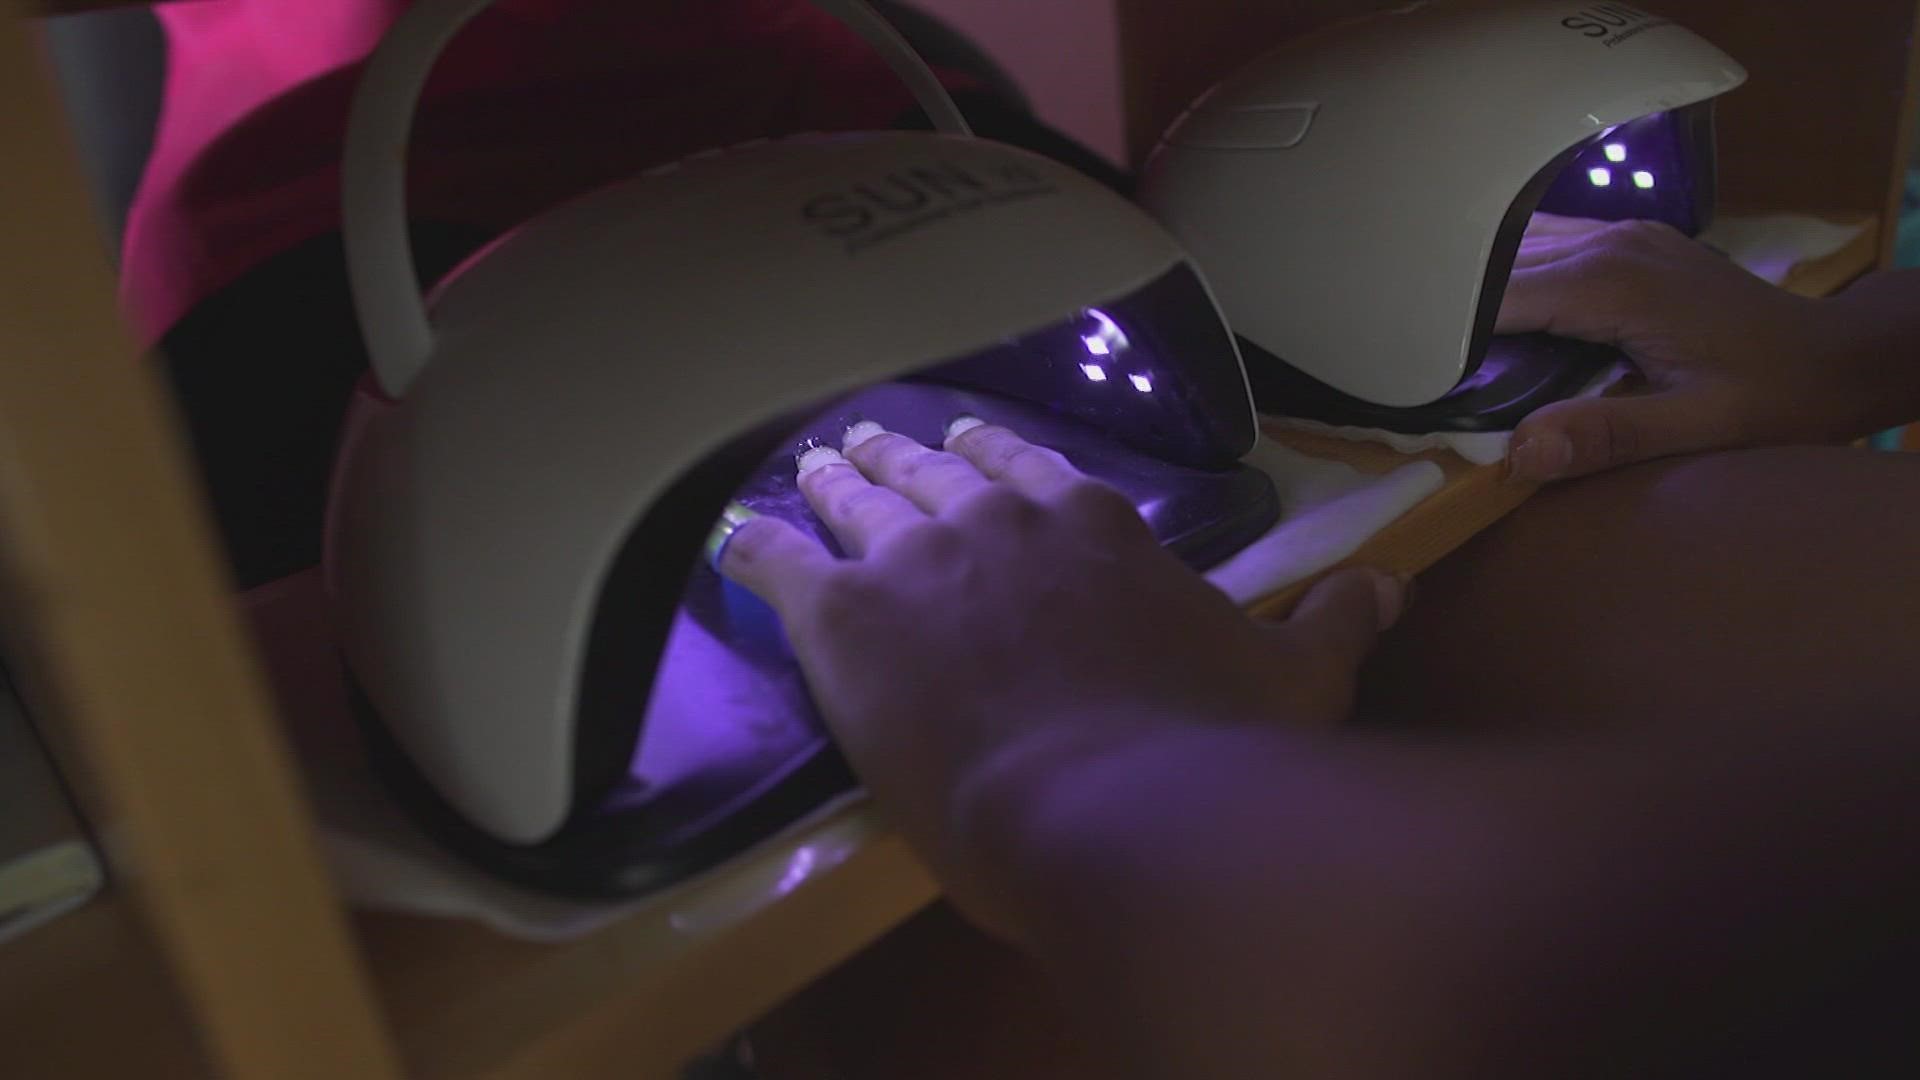 A recent study shared that UV nail dryers used for gel manicures could be associated with a higher risk of skin cancer.